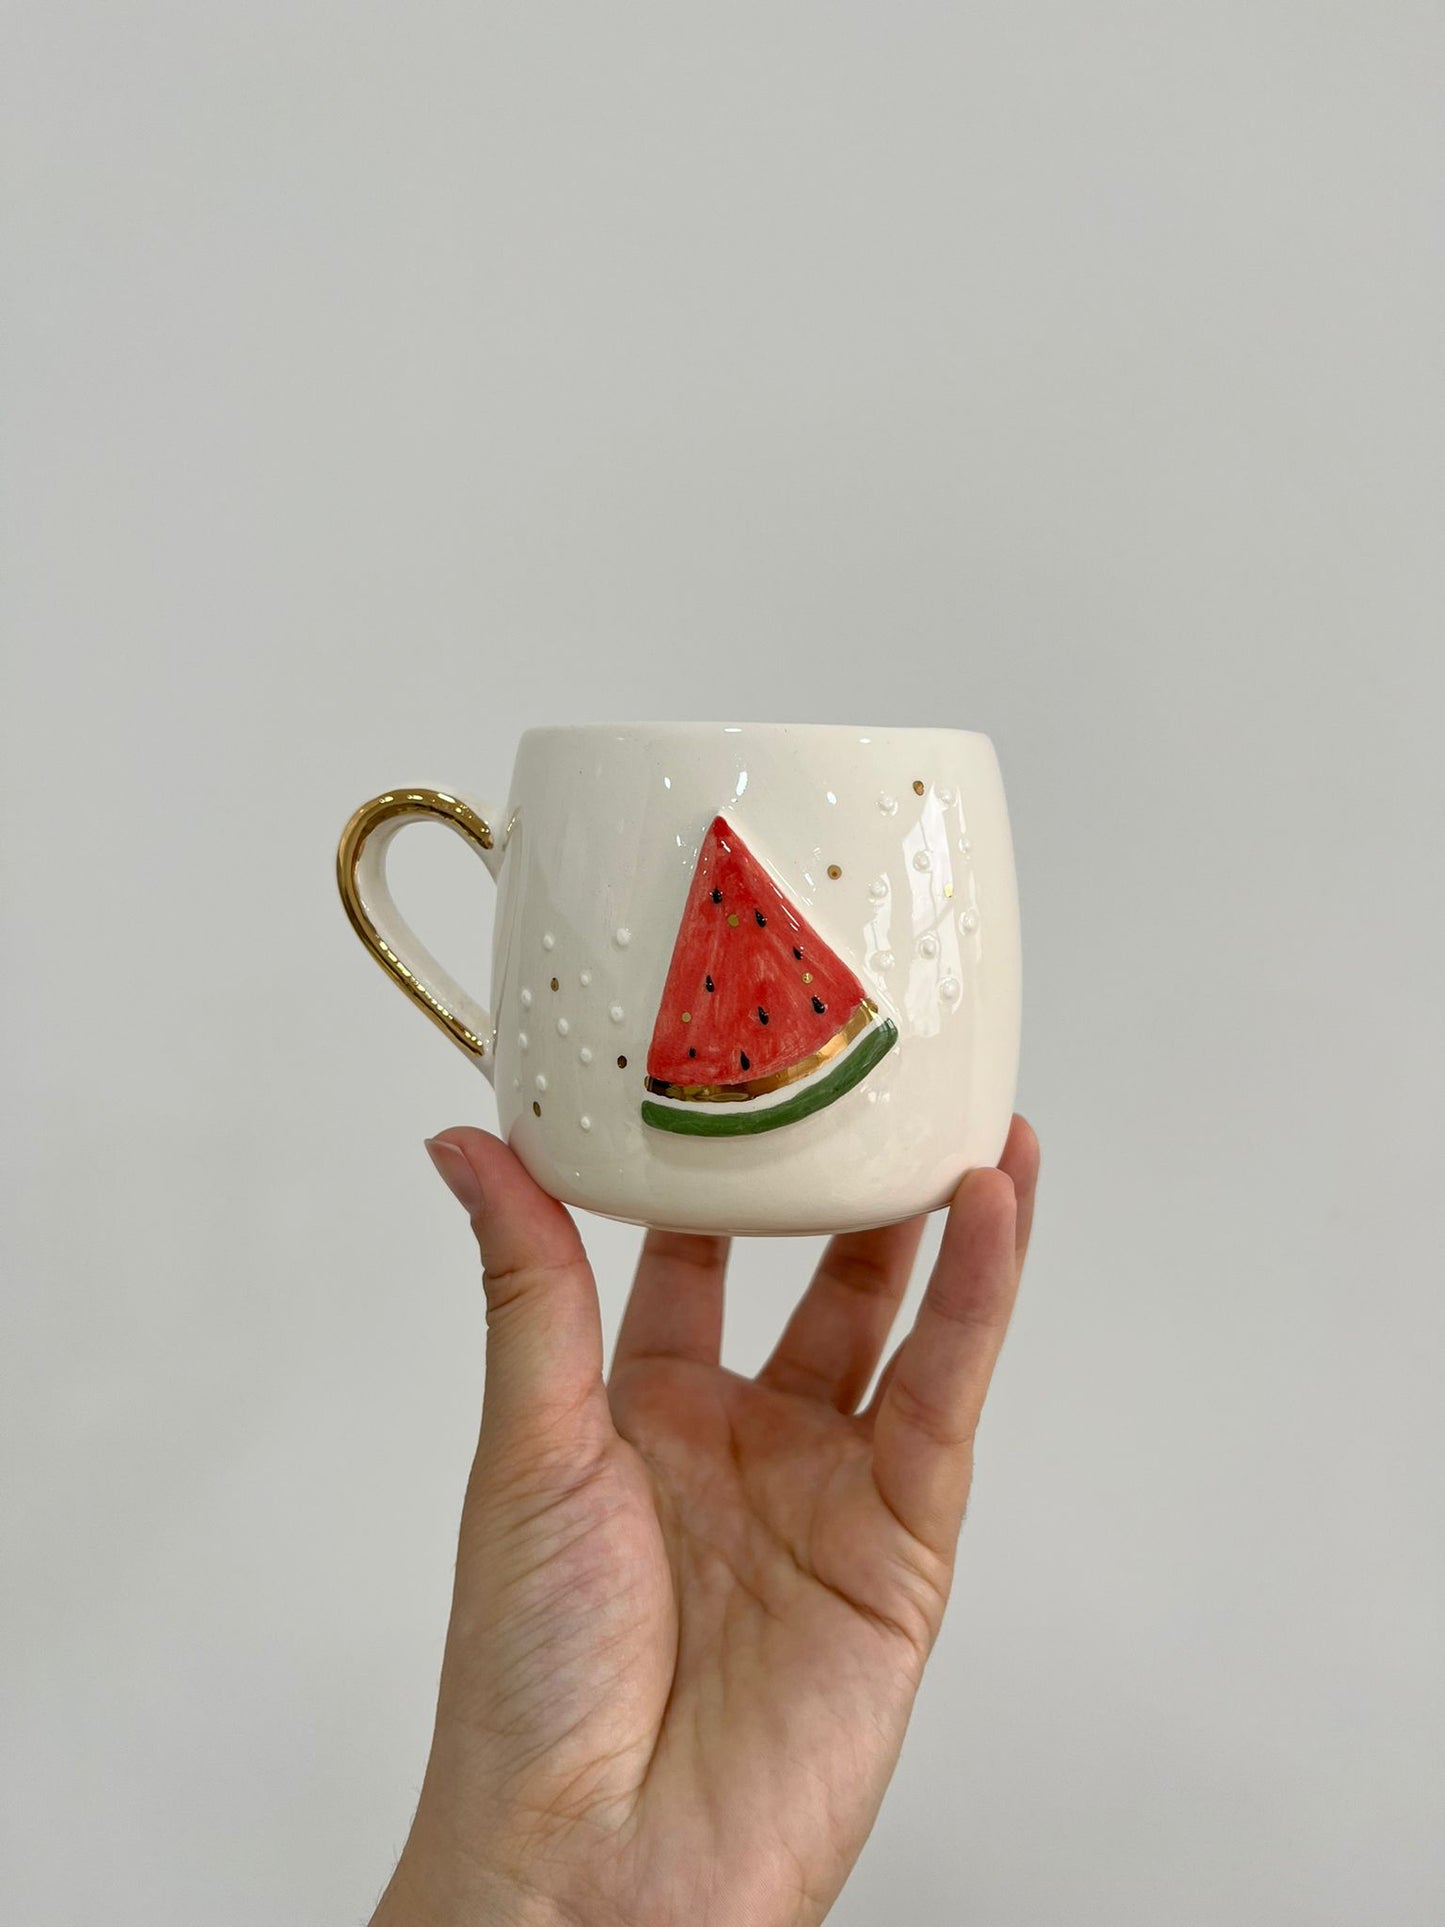 Handcrafted Watermelon Mug with Gold Handle - A Slice of Summer